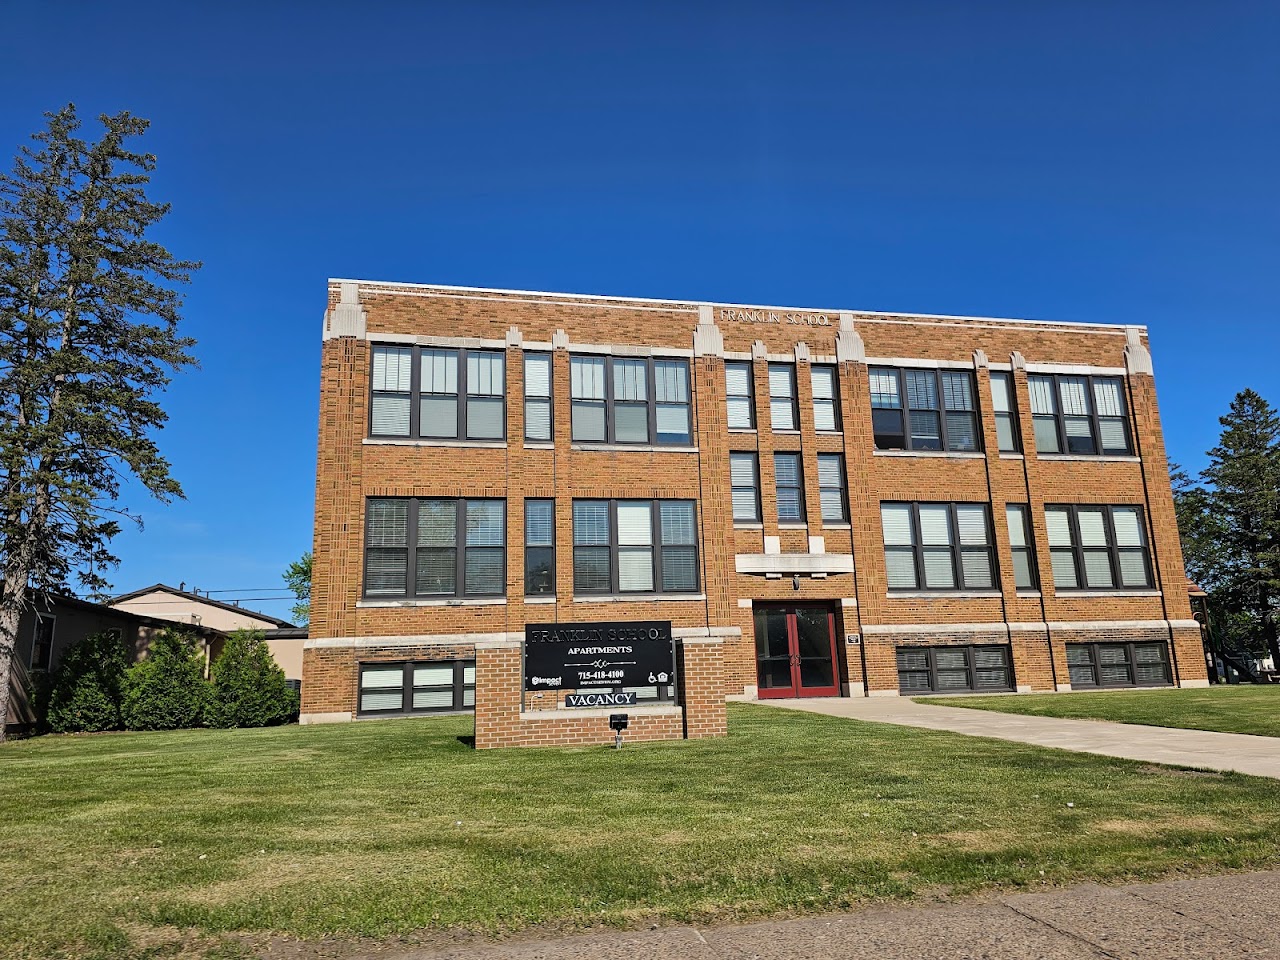 Photo of FRANKLIN SCHOOL APARTMENTS. Affordable housing located at 1011 S MAIN STREET RICE LAKE, WI 54868